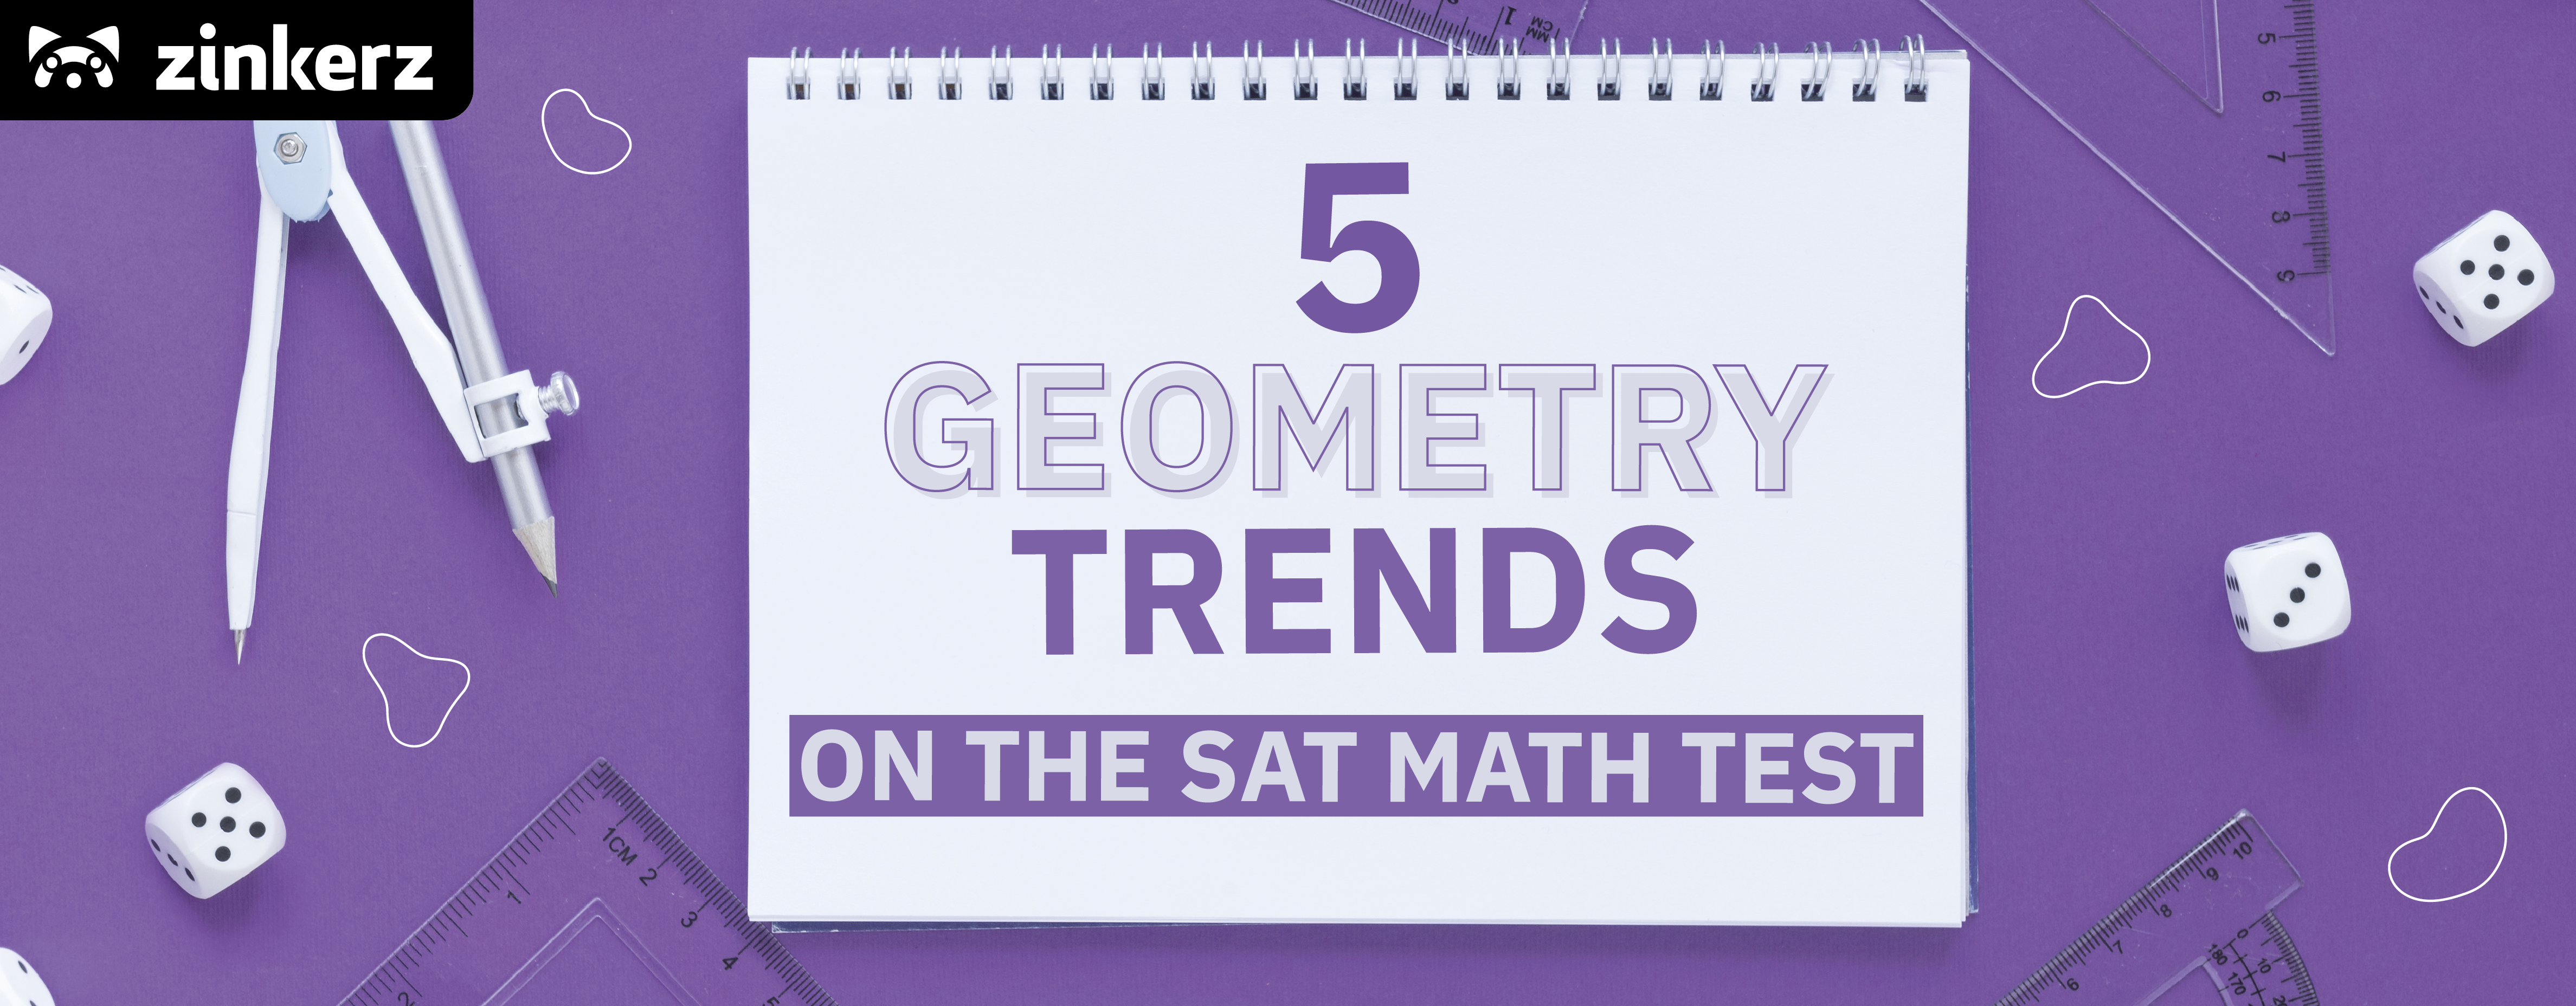 5 Geometry Trends on the SAT Math Test